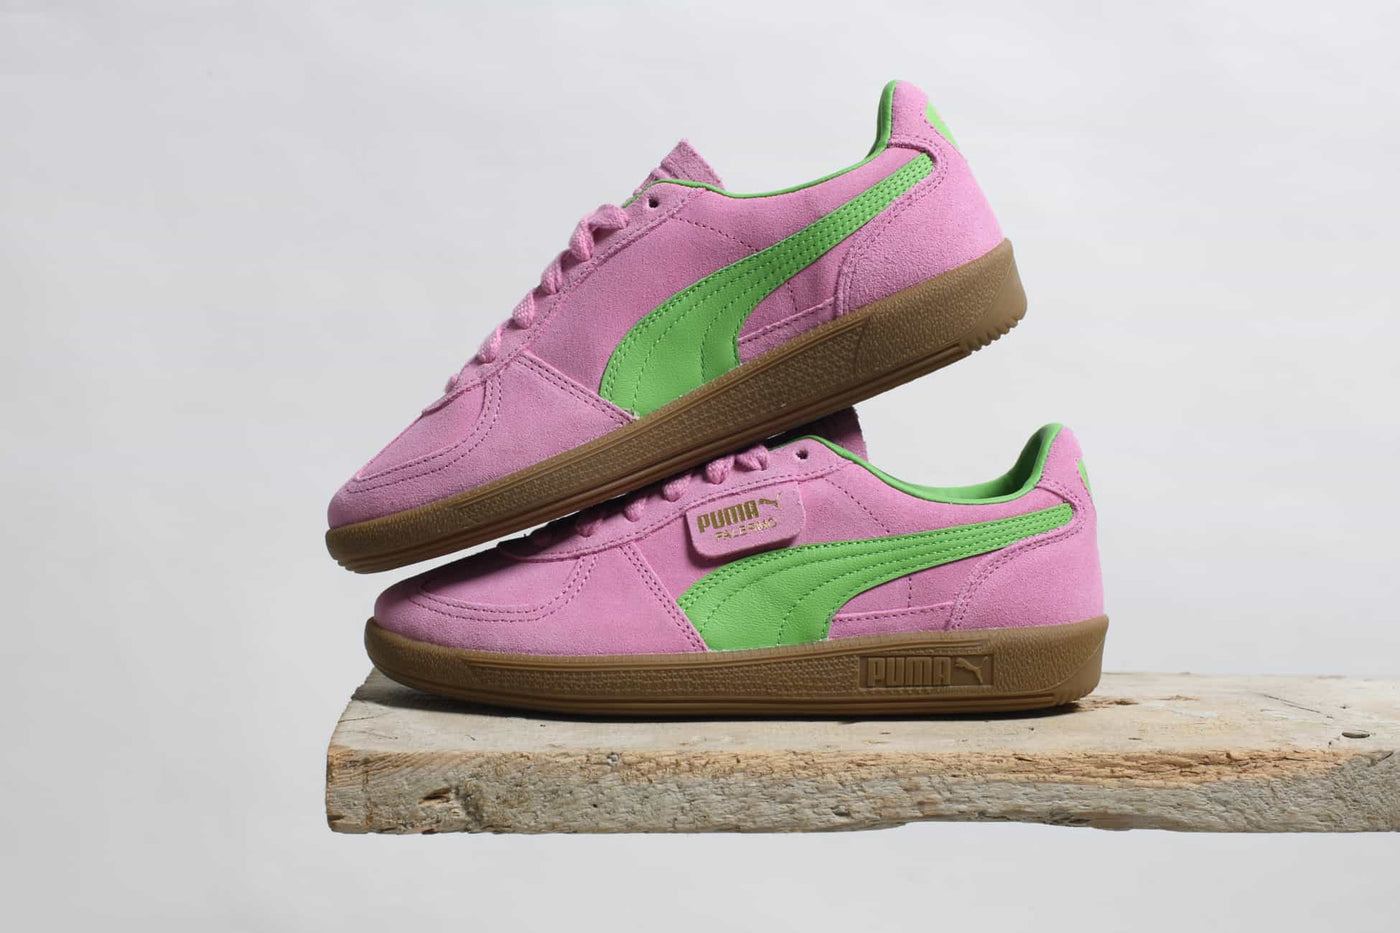 PUMA PALERMO SPECIAL pink delight green gum